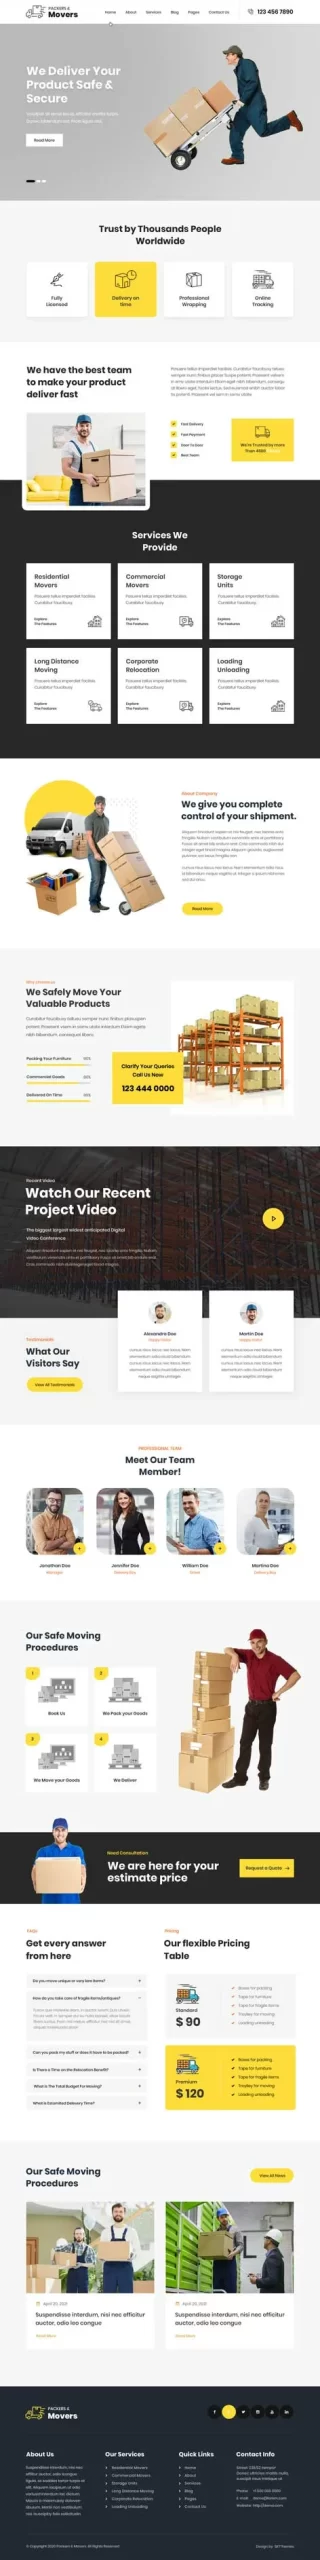 packers and movers WordPress theme